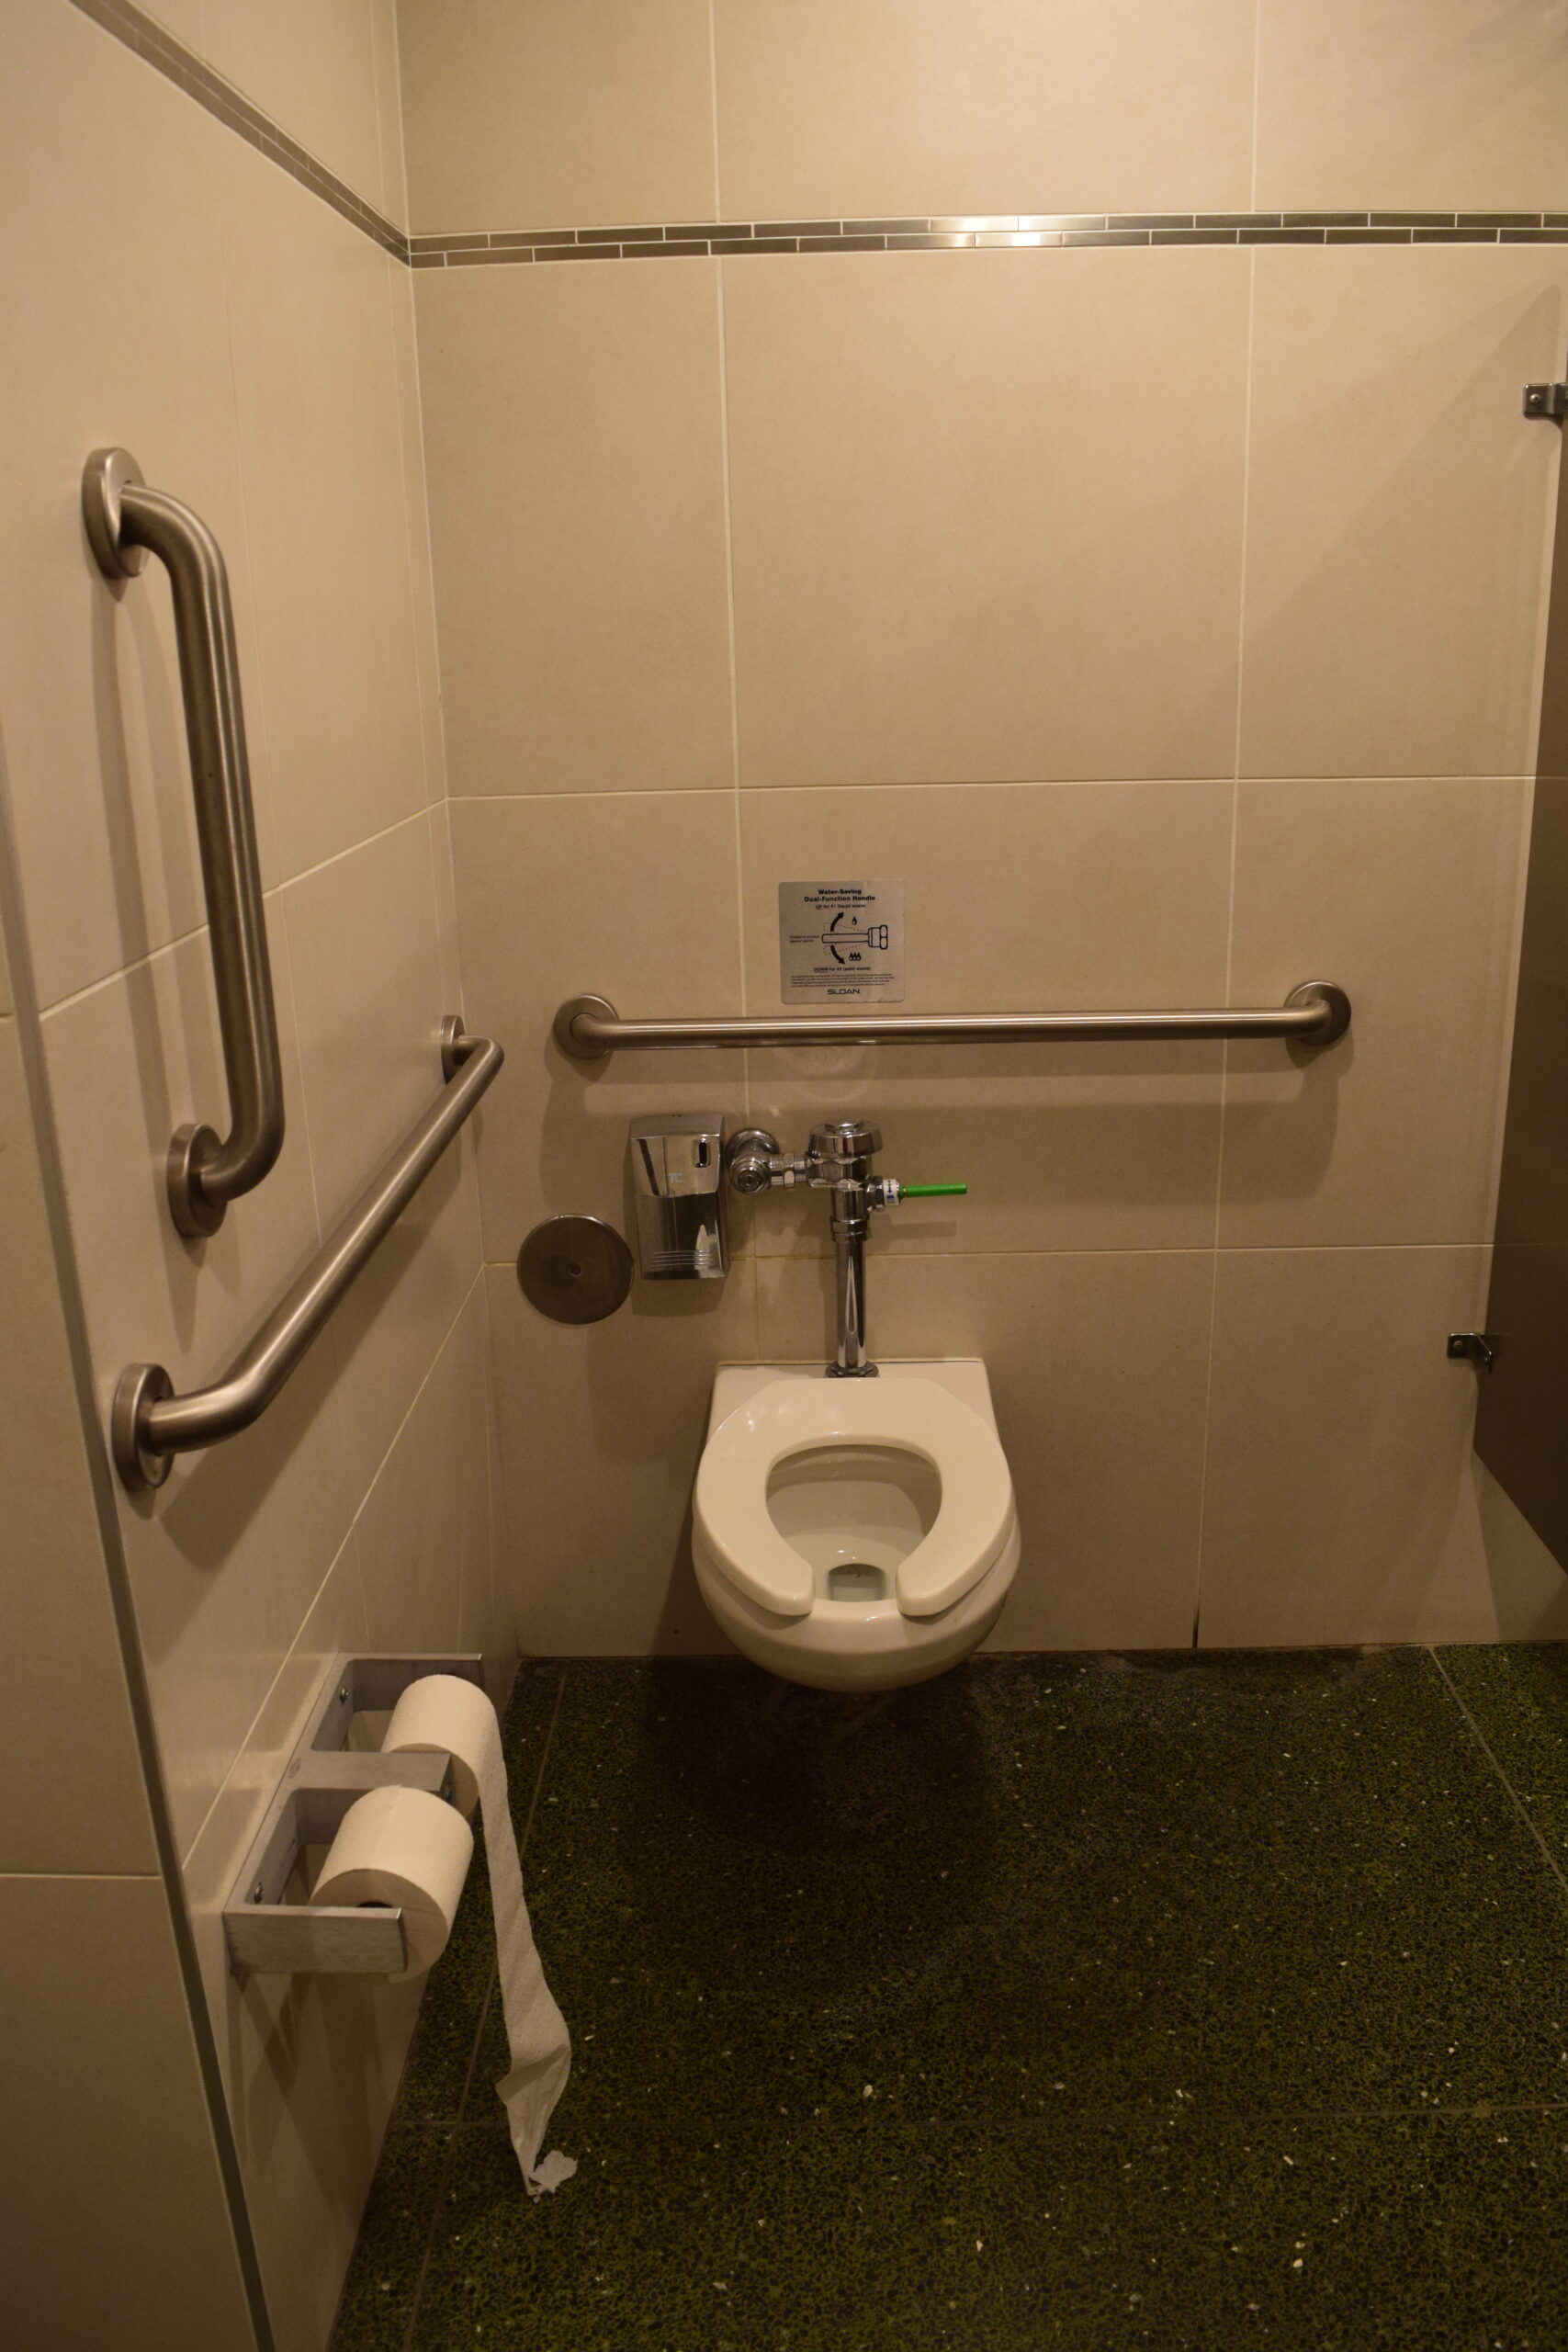 A toilet with grab bars on the right and behind, and two toilet paper dispensers in front and on the right of the toilet.